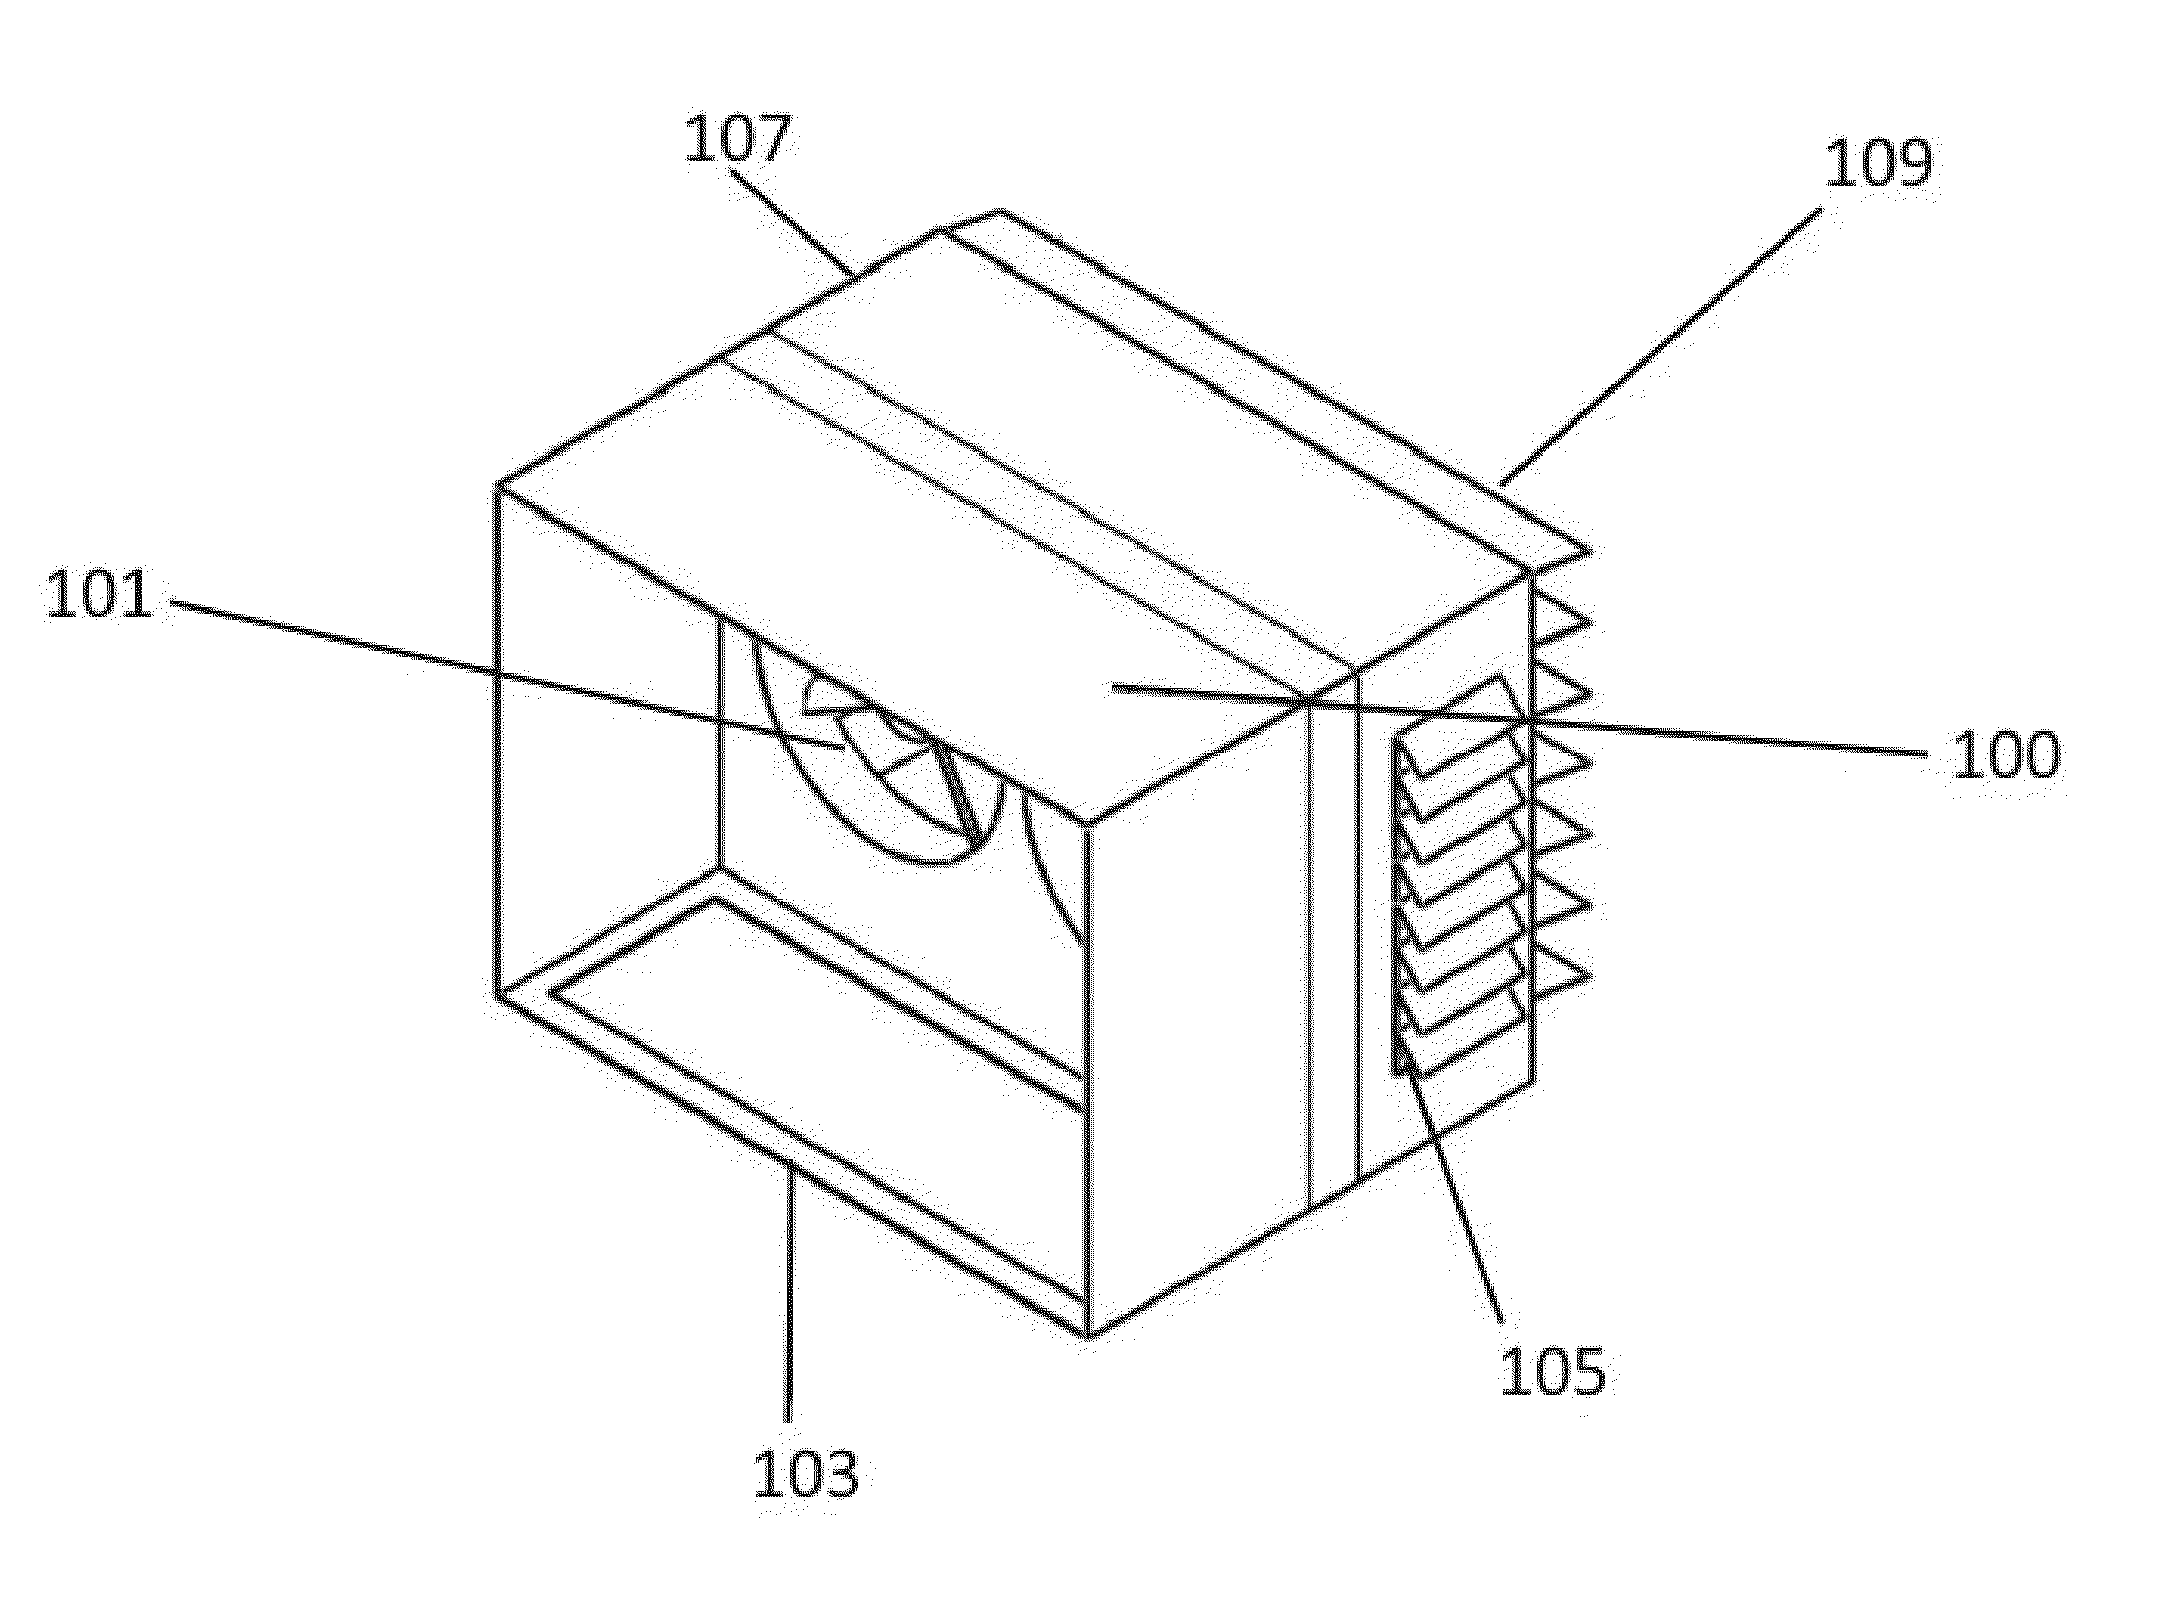 Device and System for Eliminating Air Pockets, Eliminating Air Stratification, Minimizing Inconsistent Temperature, and Increasing Internal Air Turns